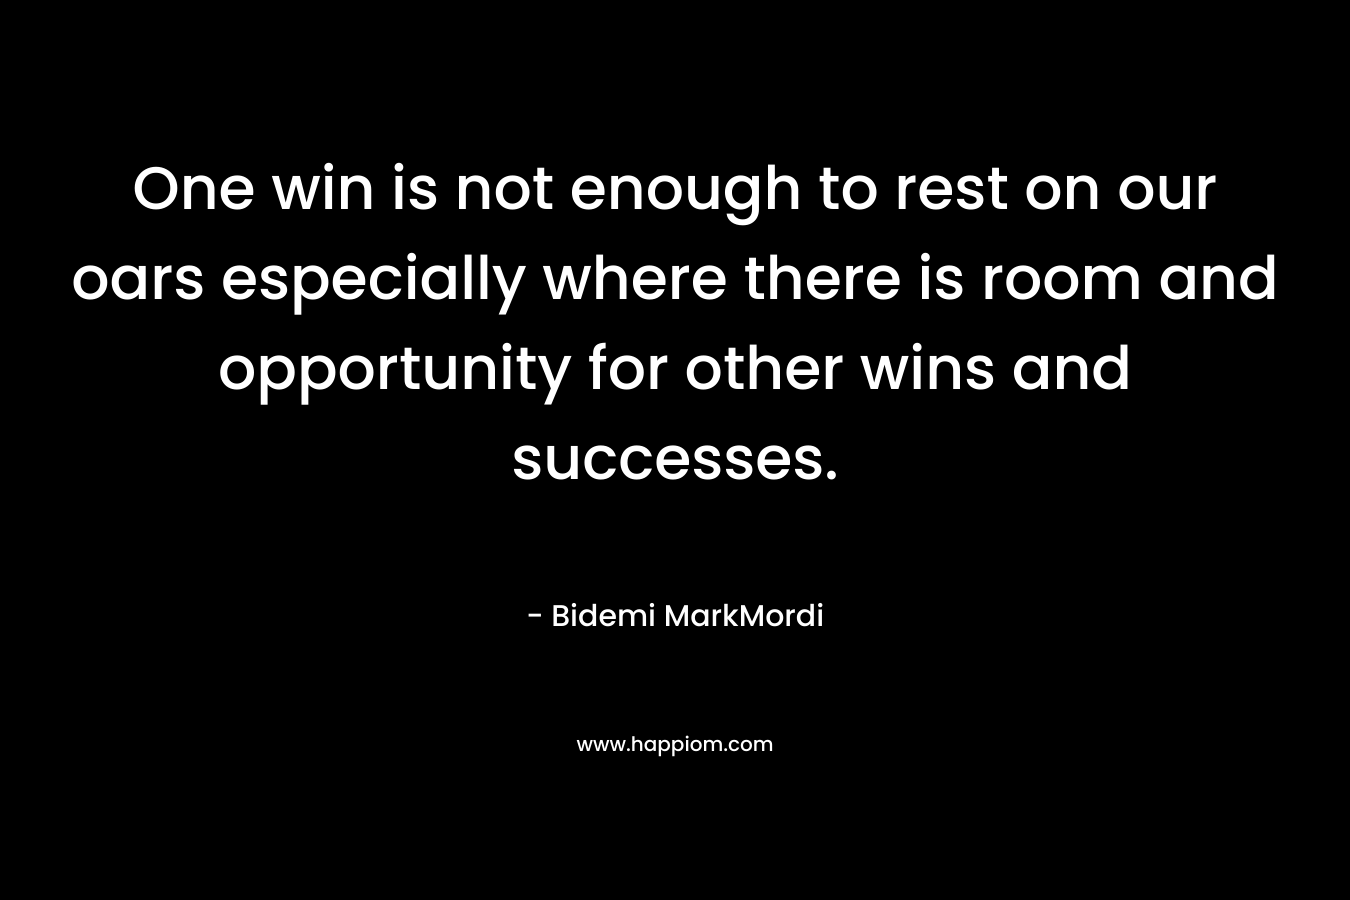 One win is not enough to rest on our oars especially where there is room and opportunity for other wins and successes.